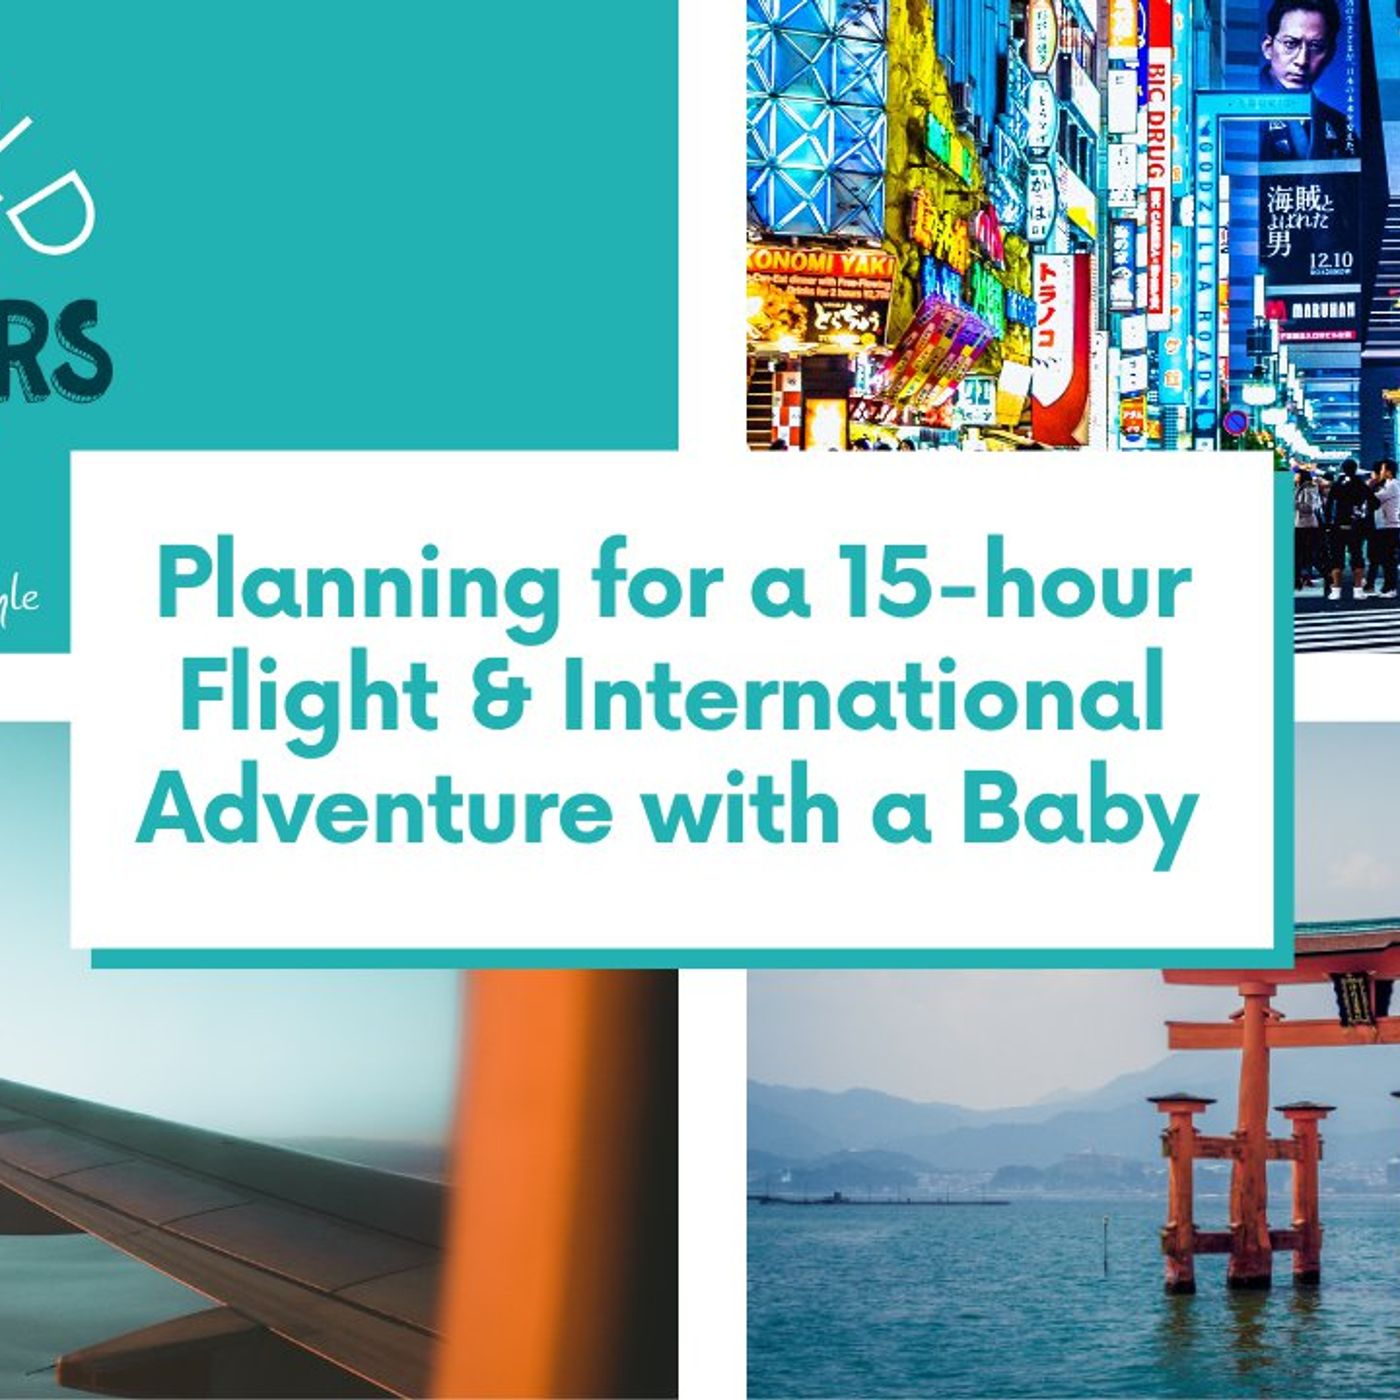 Planning for a 15-hour Flight & International Adventure with a Baby